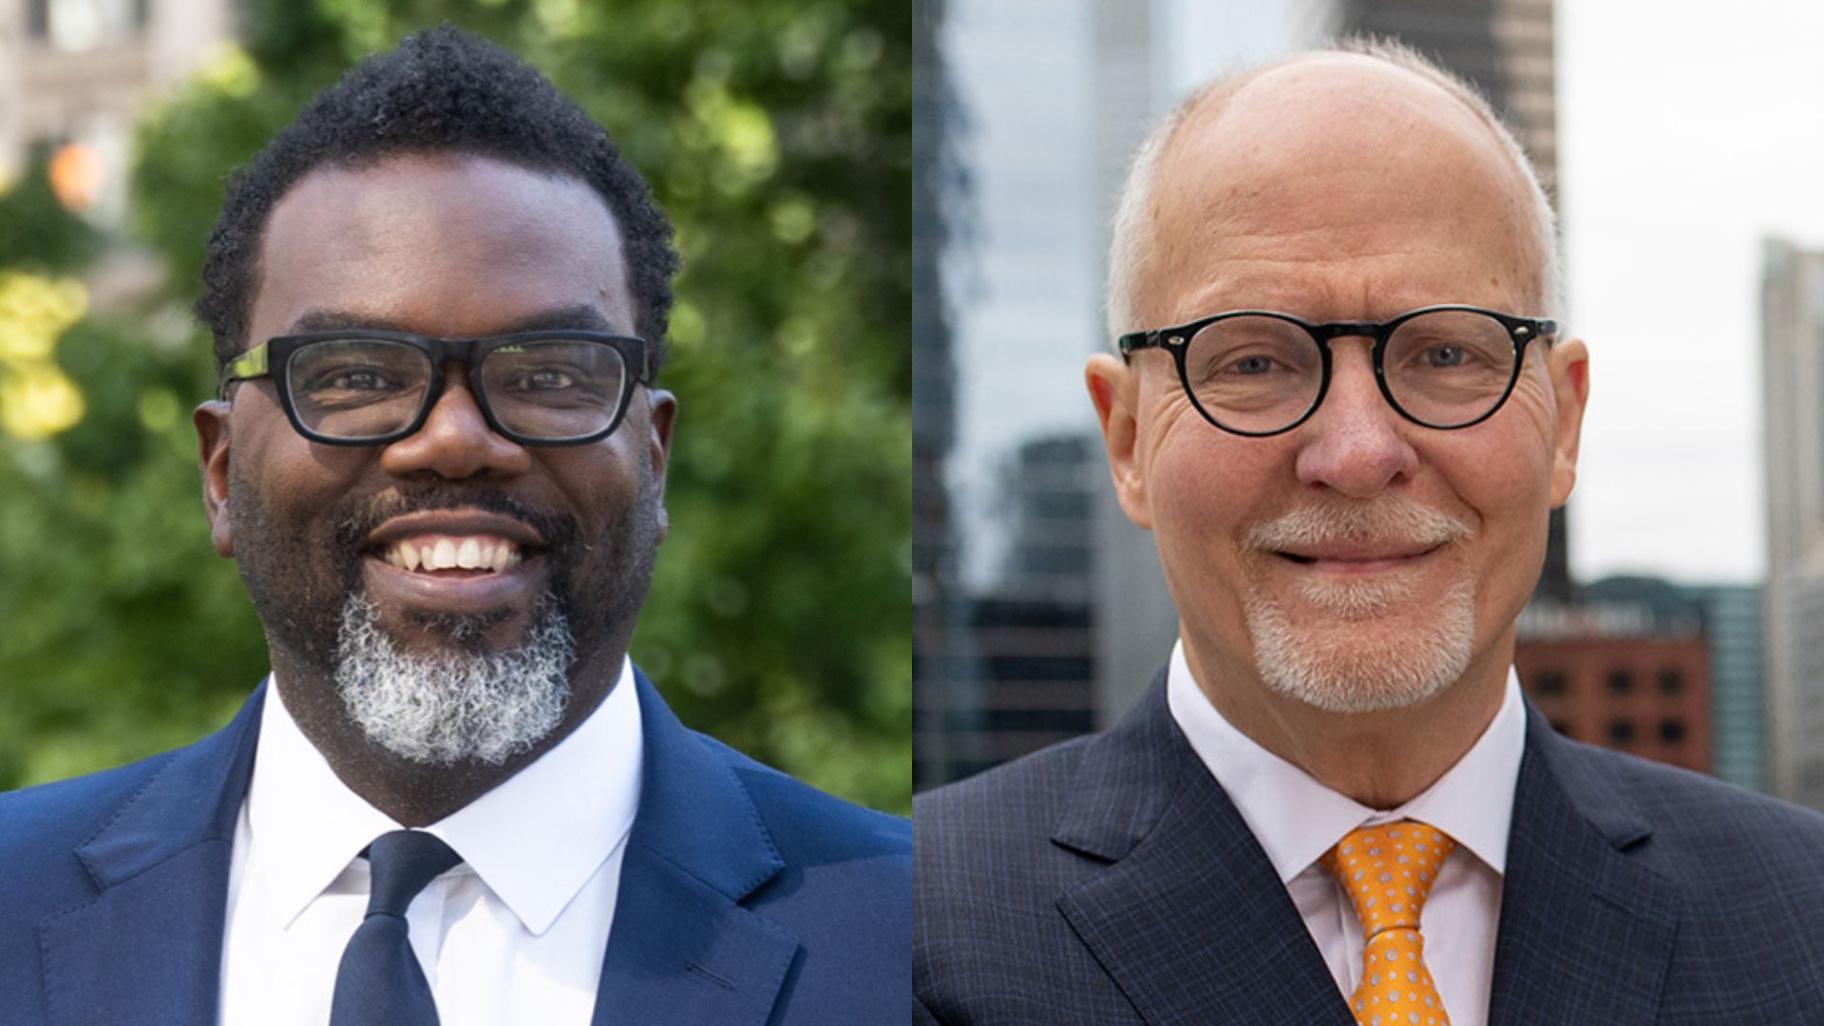 Chicago mayoral candidates Brandon Johnson and Paul Vallas. (Provided)